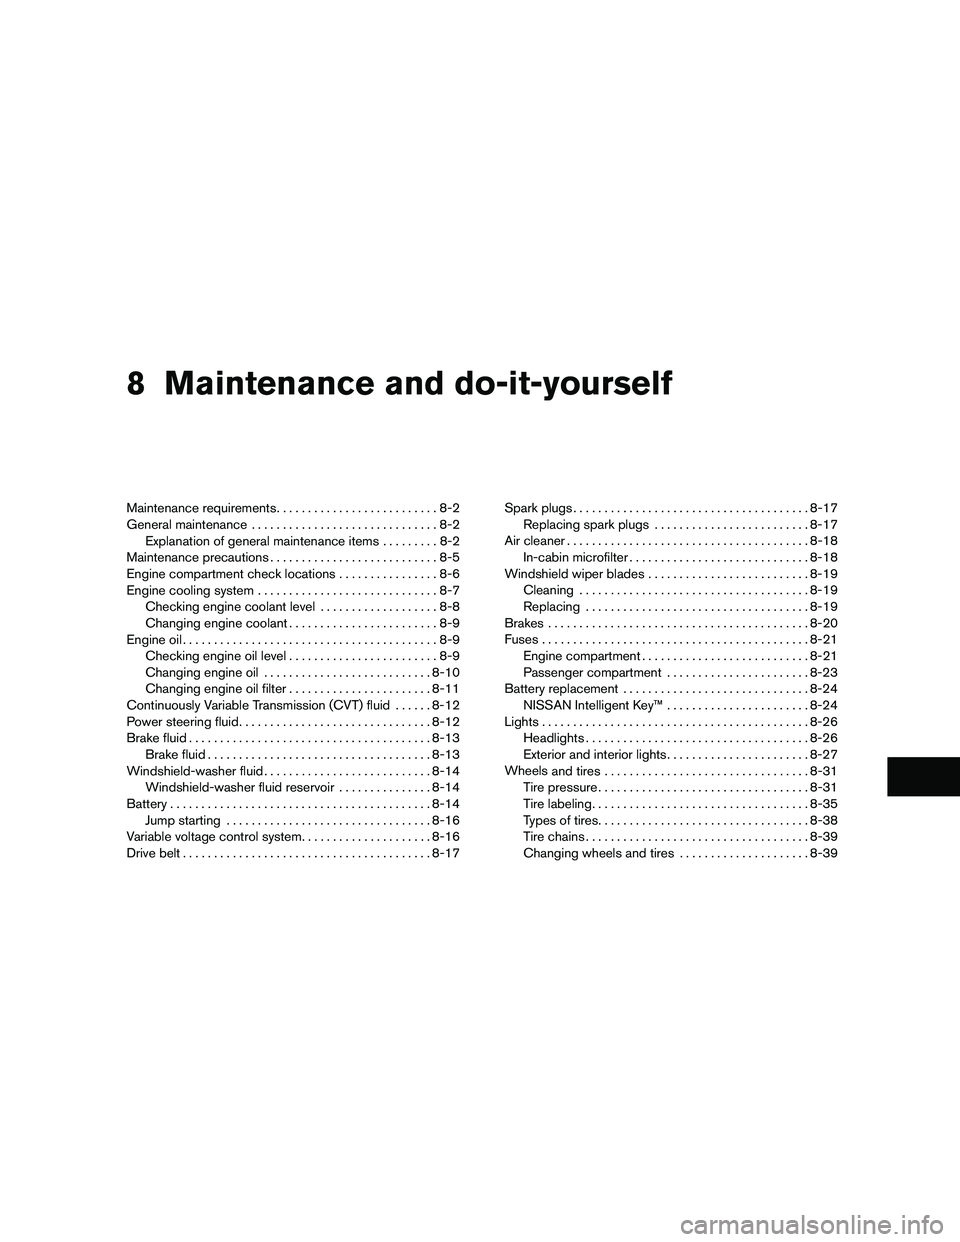 NISSAN MAXIMA 2011  Owner´s Manual 8 Maintenance and do-it-yourself
Maintenance requirements..........................8-2
General maintenance ..............................8-2
Explanation of general maintenance items .........8-2
Maint